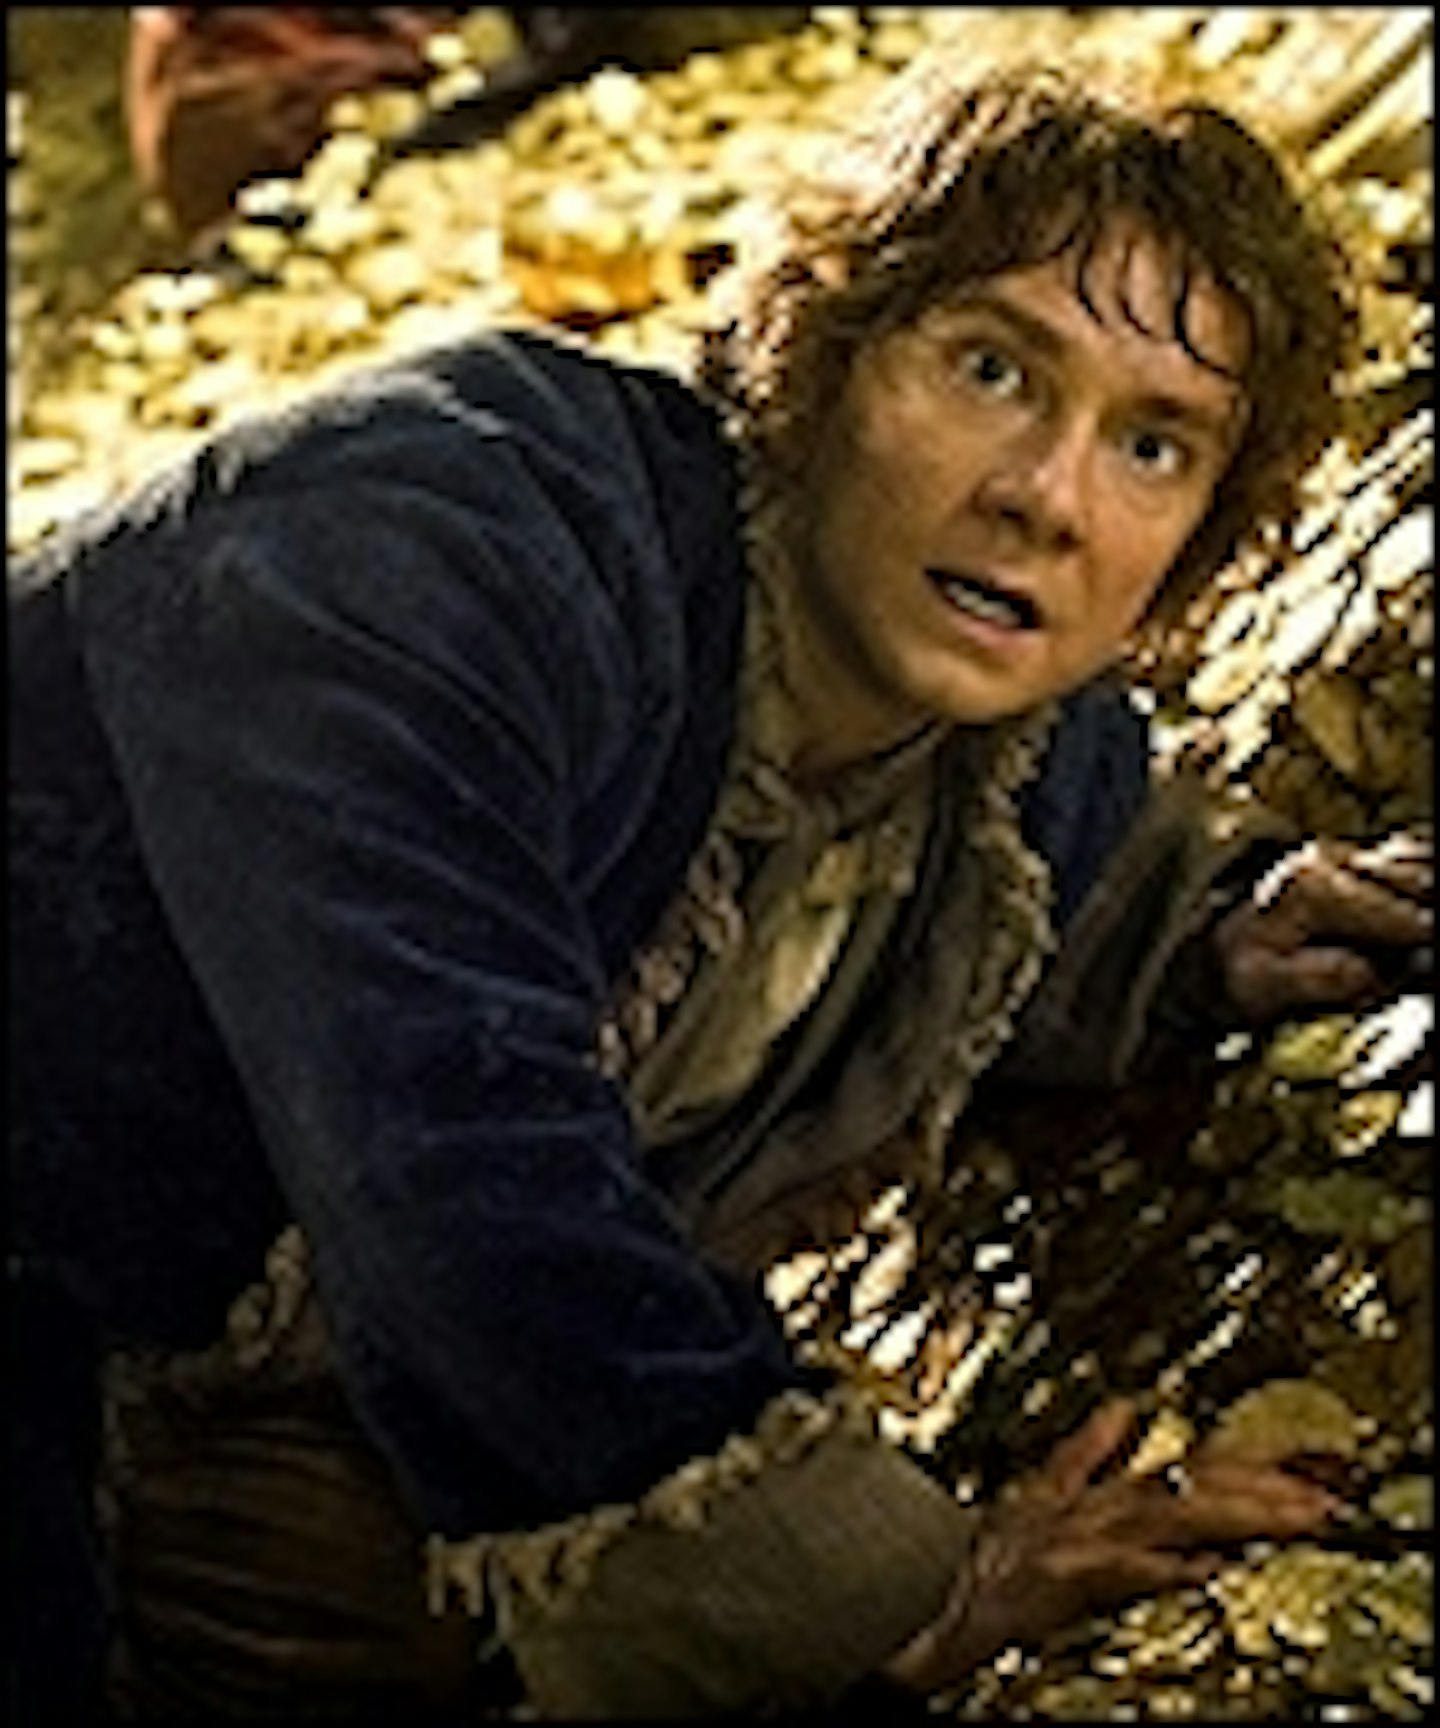 Four New The Hobbit: The Desolation Of Smaug Clips